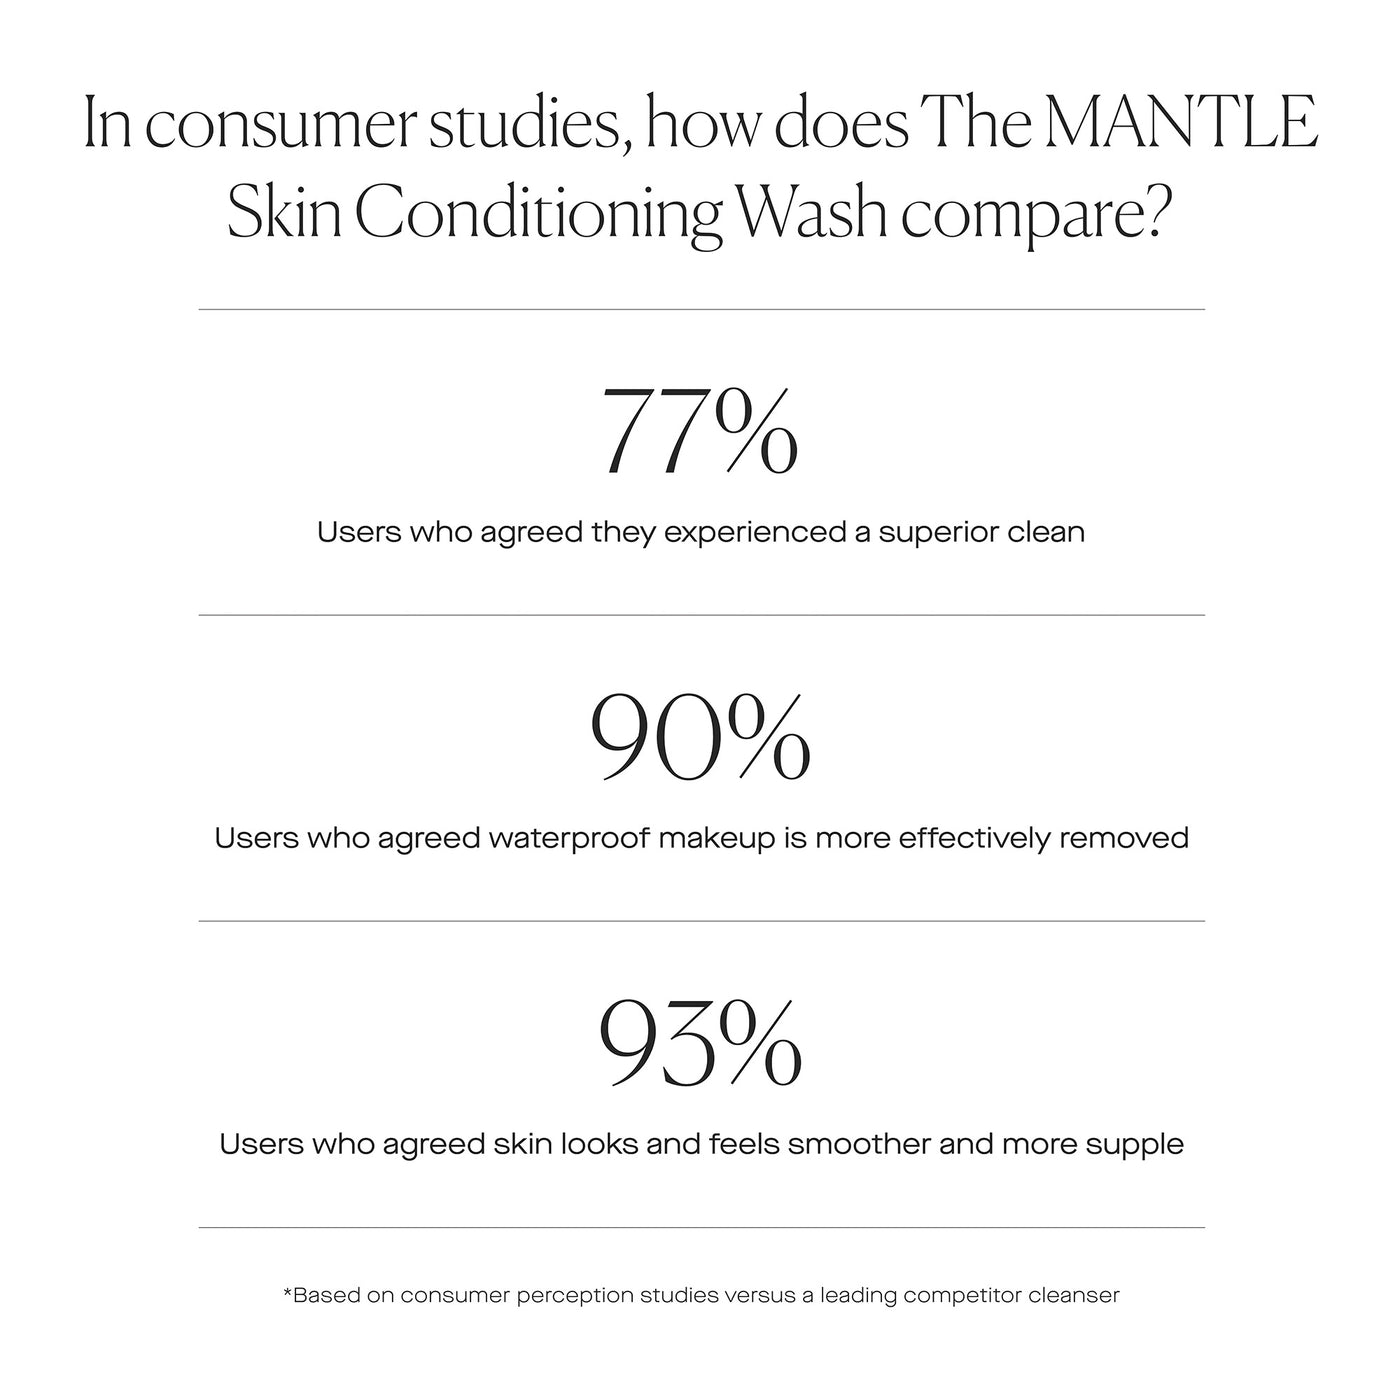 The Mantle Skin Conditioning Wash